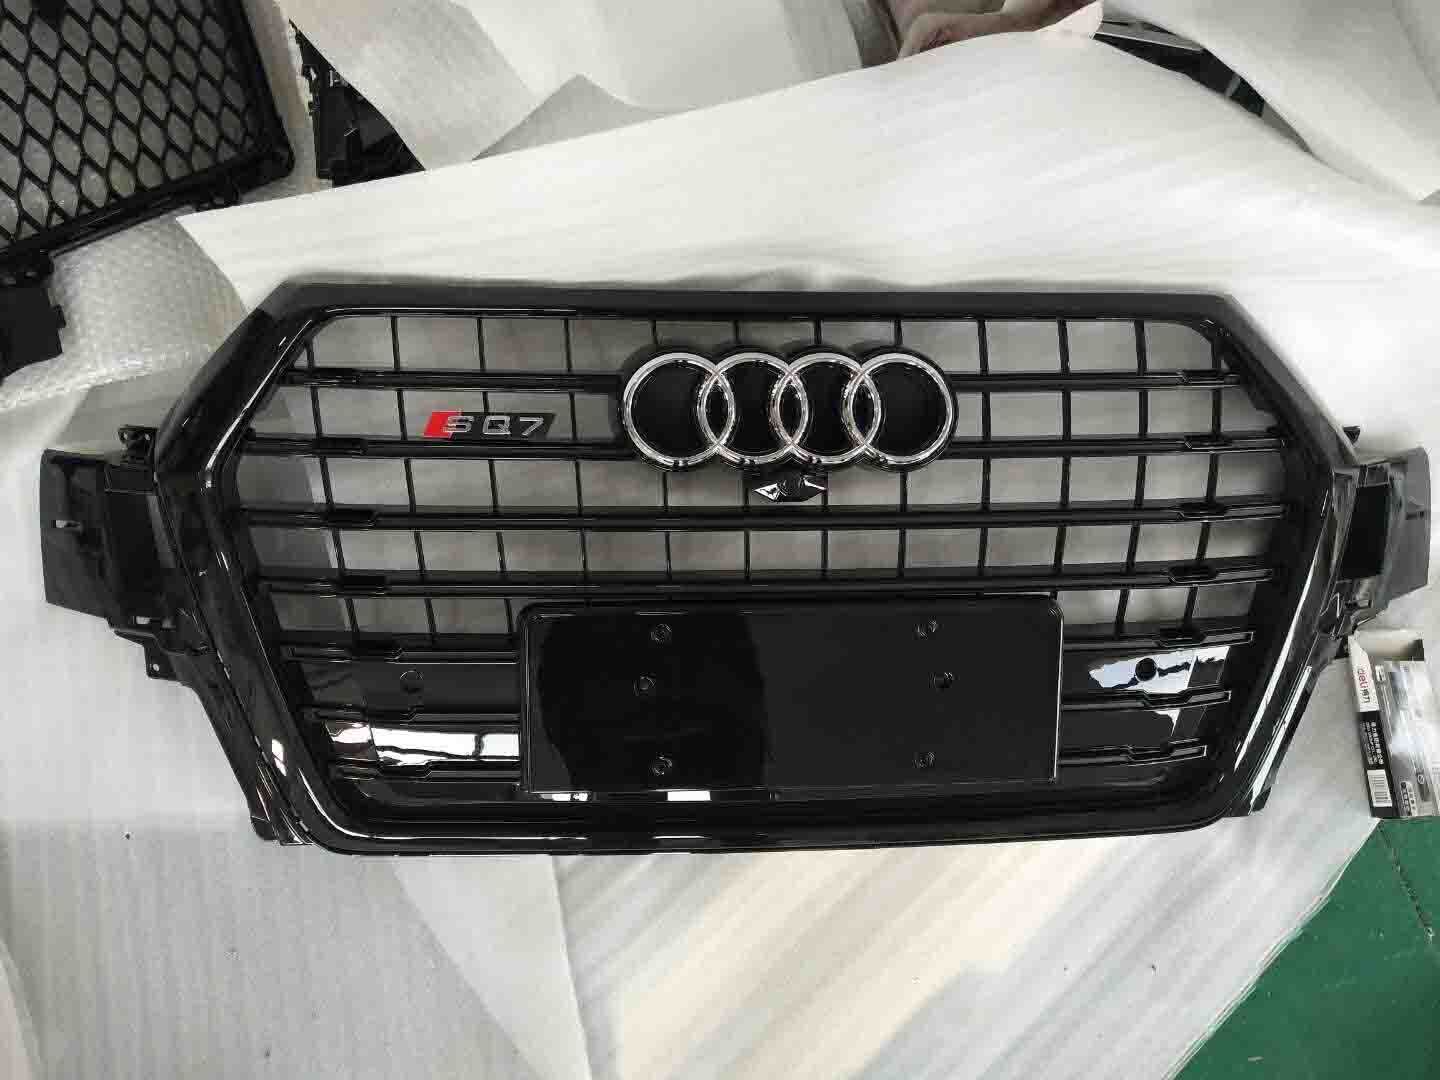 For Audi Q7 2016 2017 2018 2019 SQ7 Style Grill Black Strip Front bumper Grille